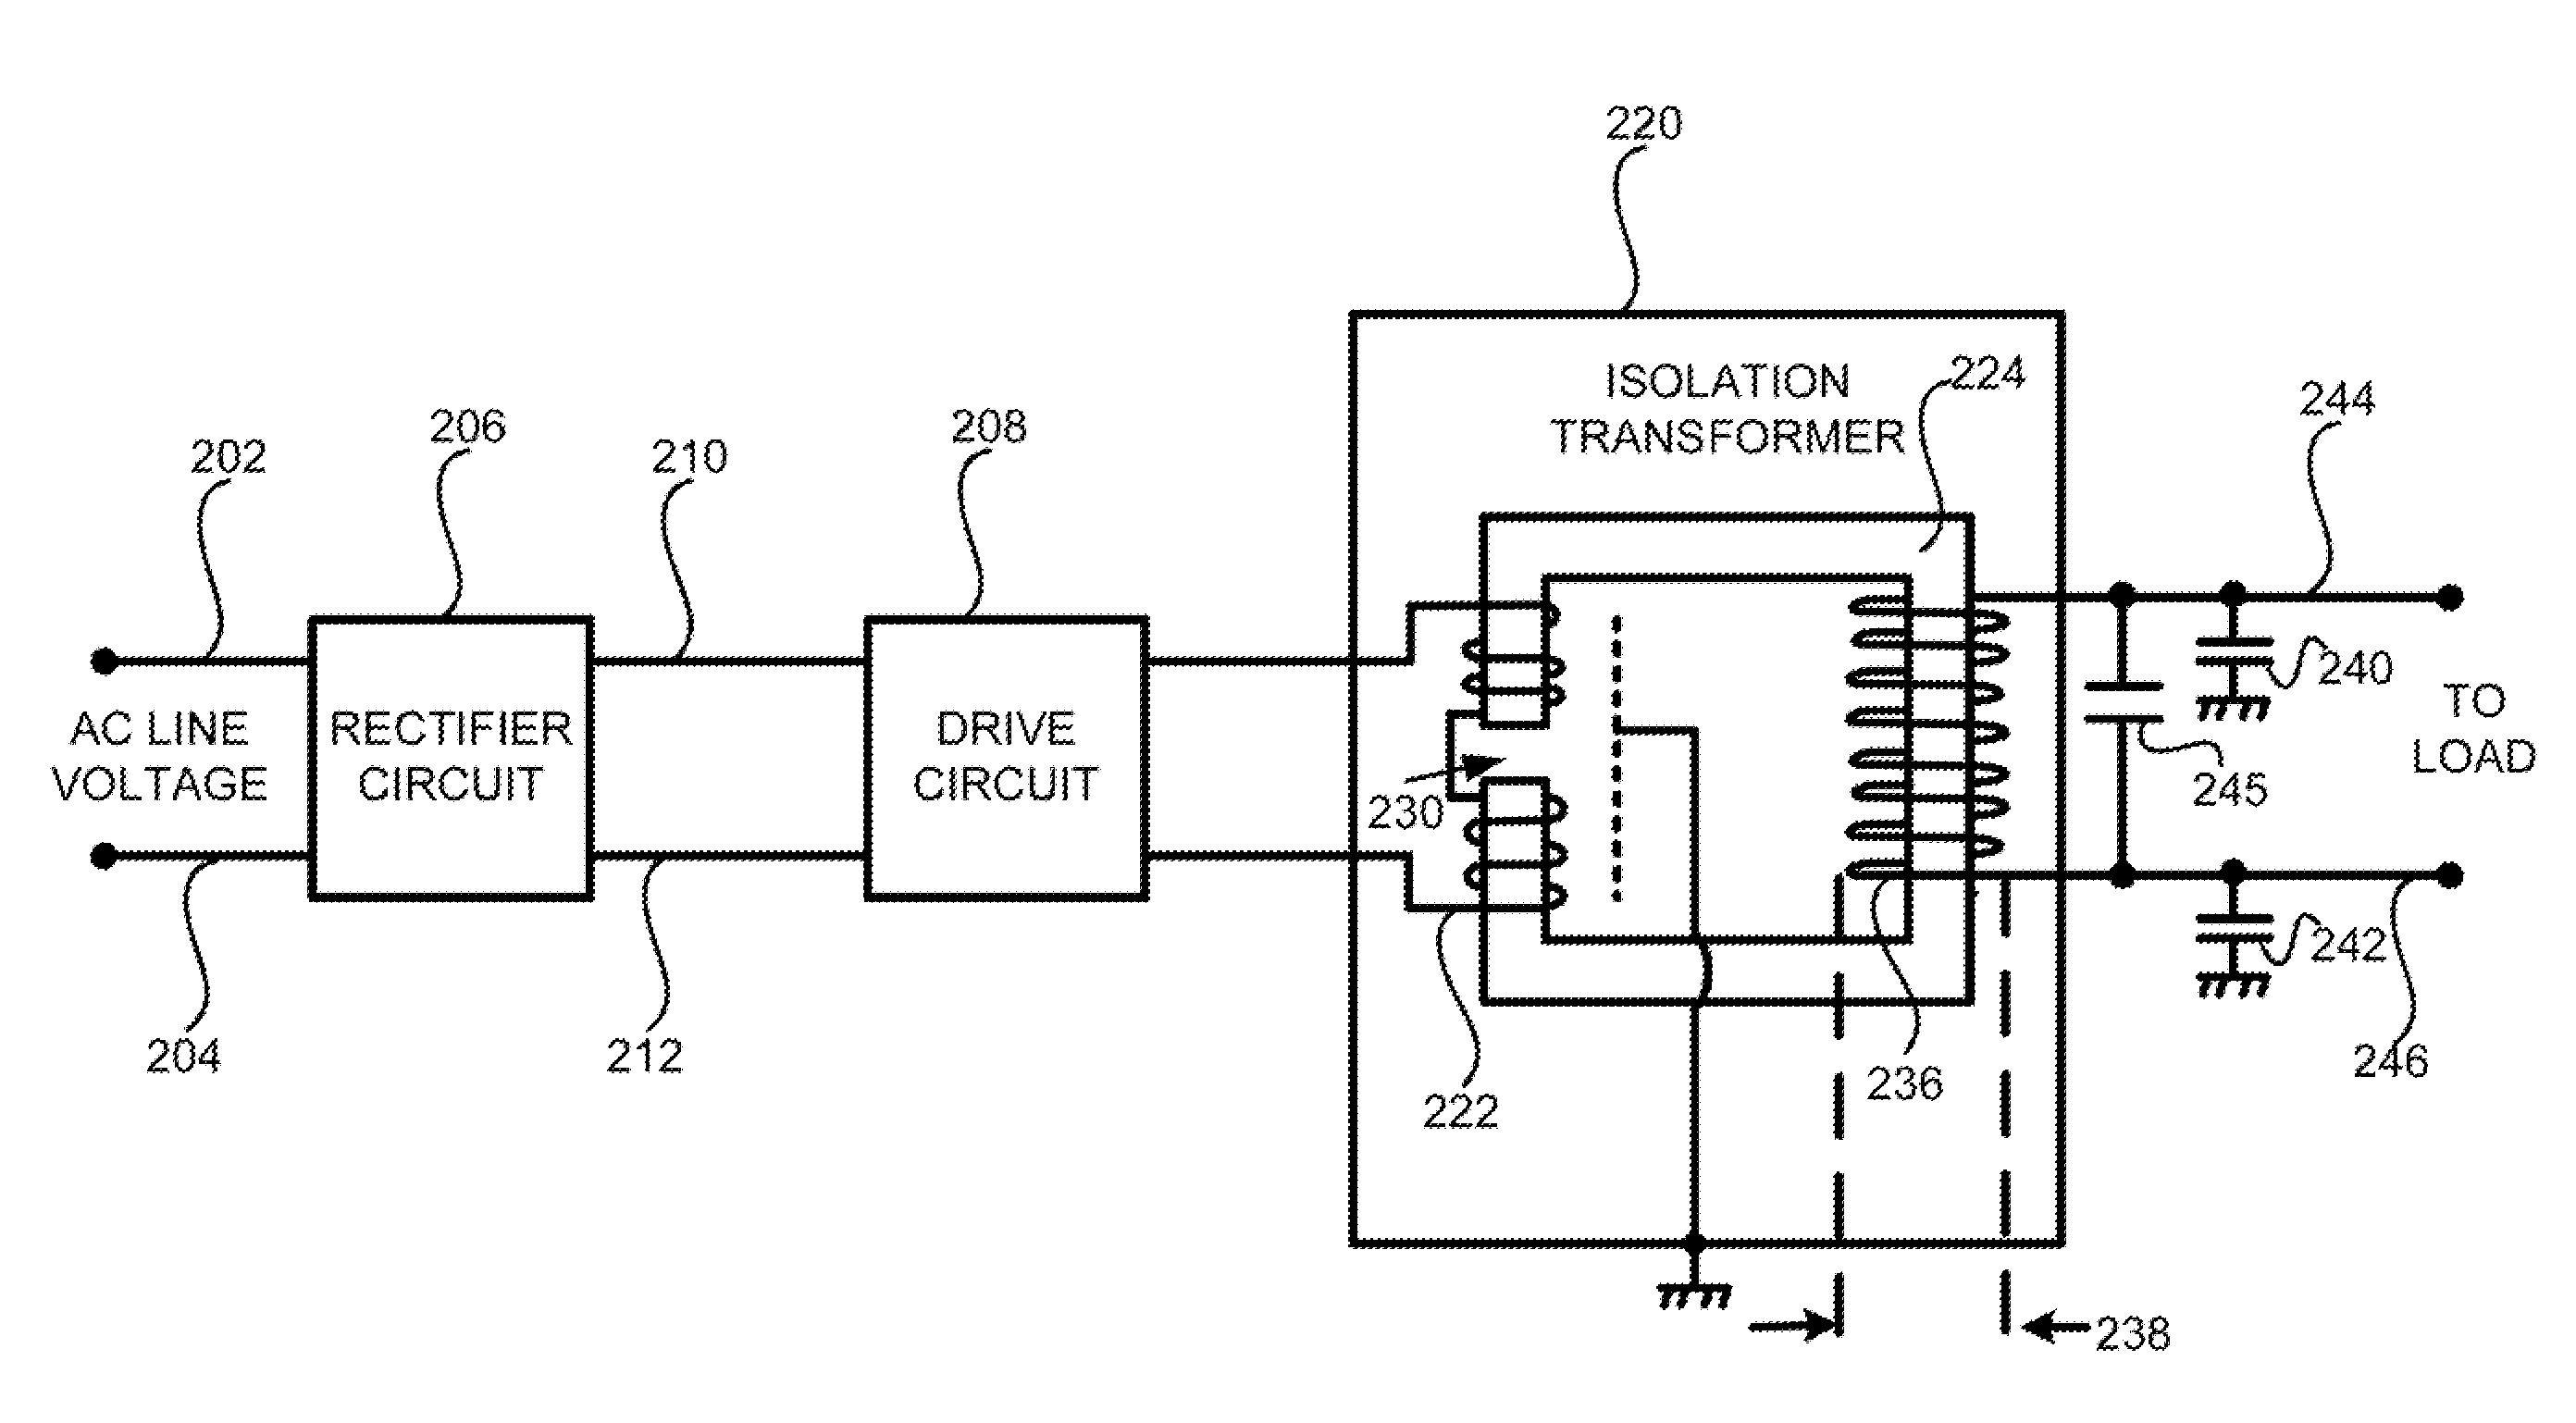 RF isolation for power circuitry